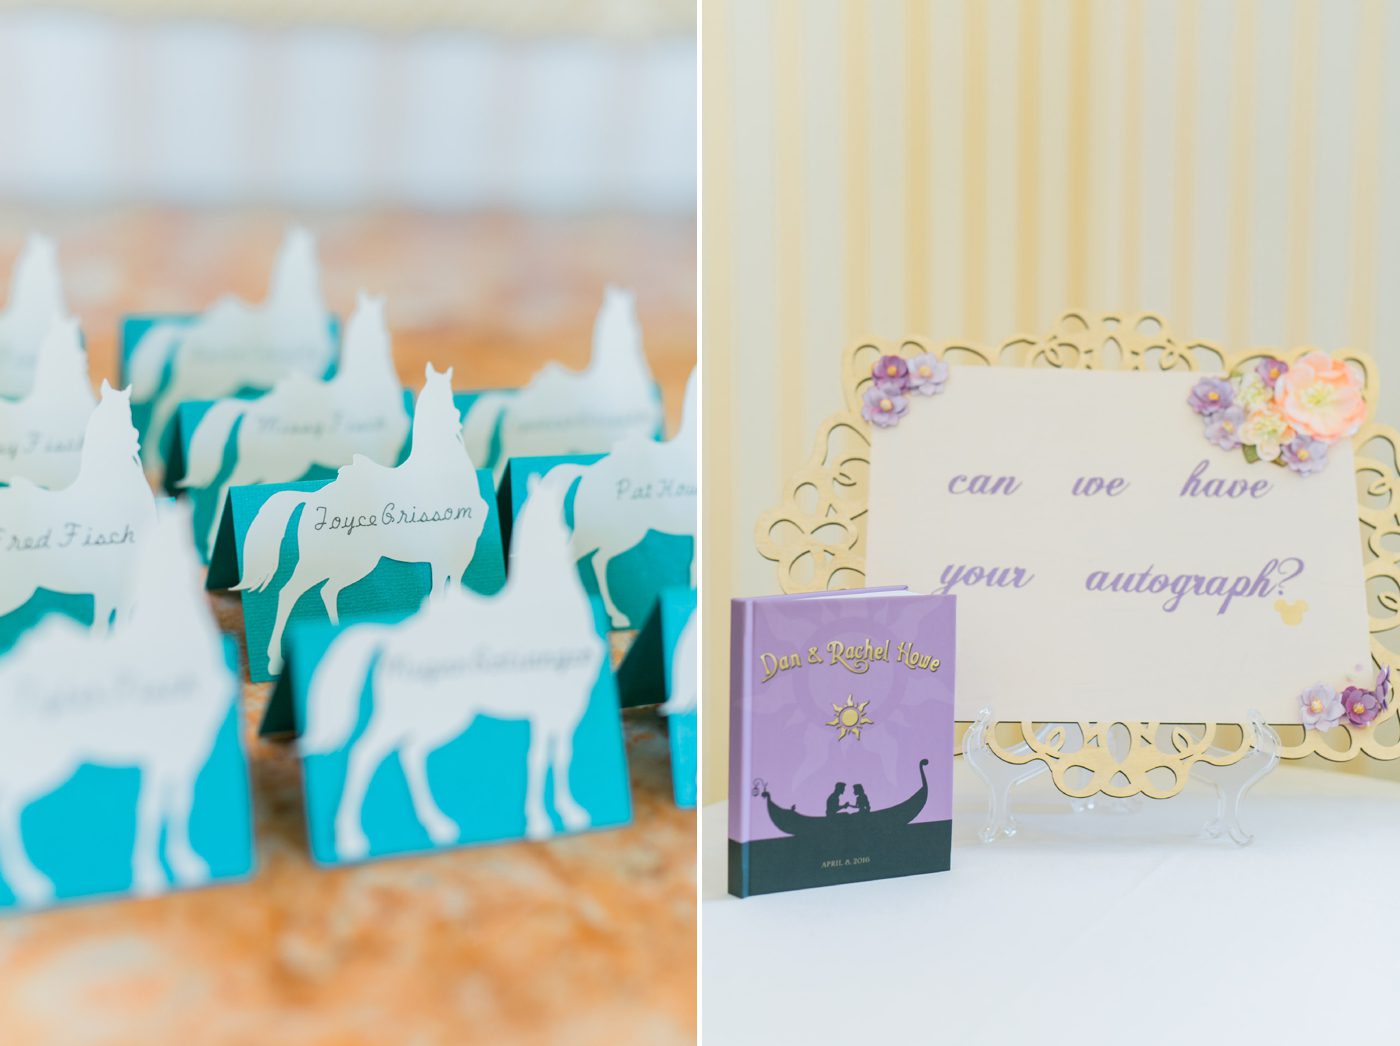 Wedding escort cards inspired by Disney's Tangled 